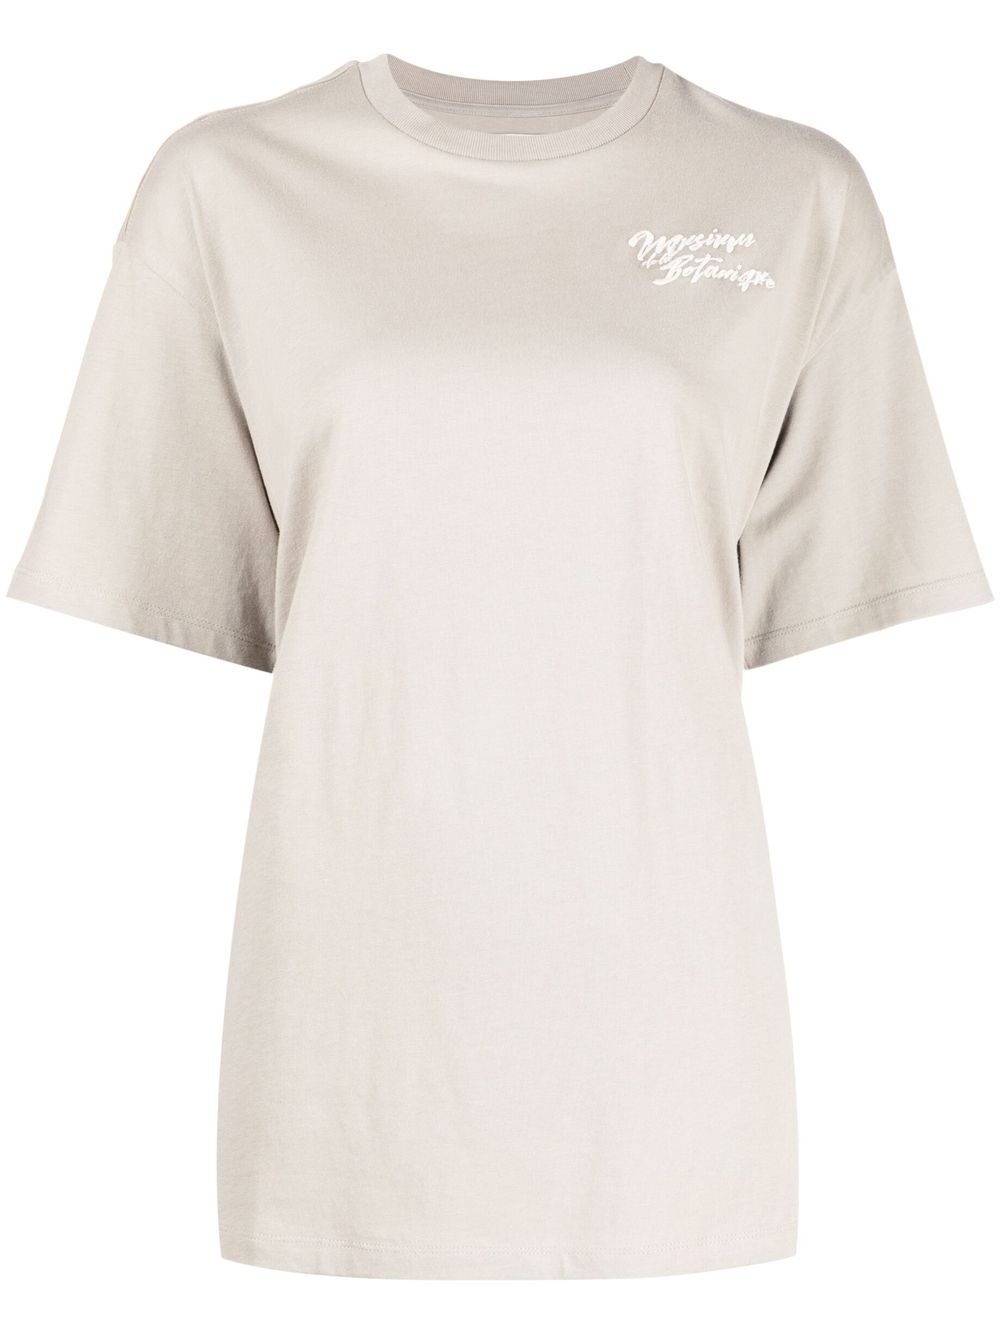 embroidered cotton t-shirt